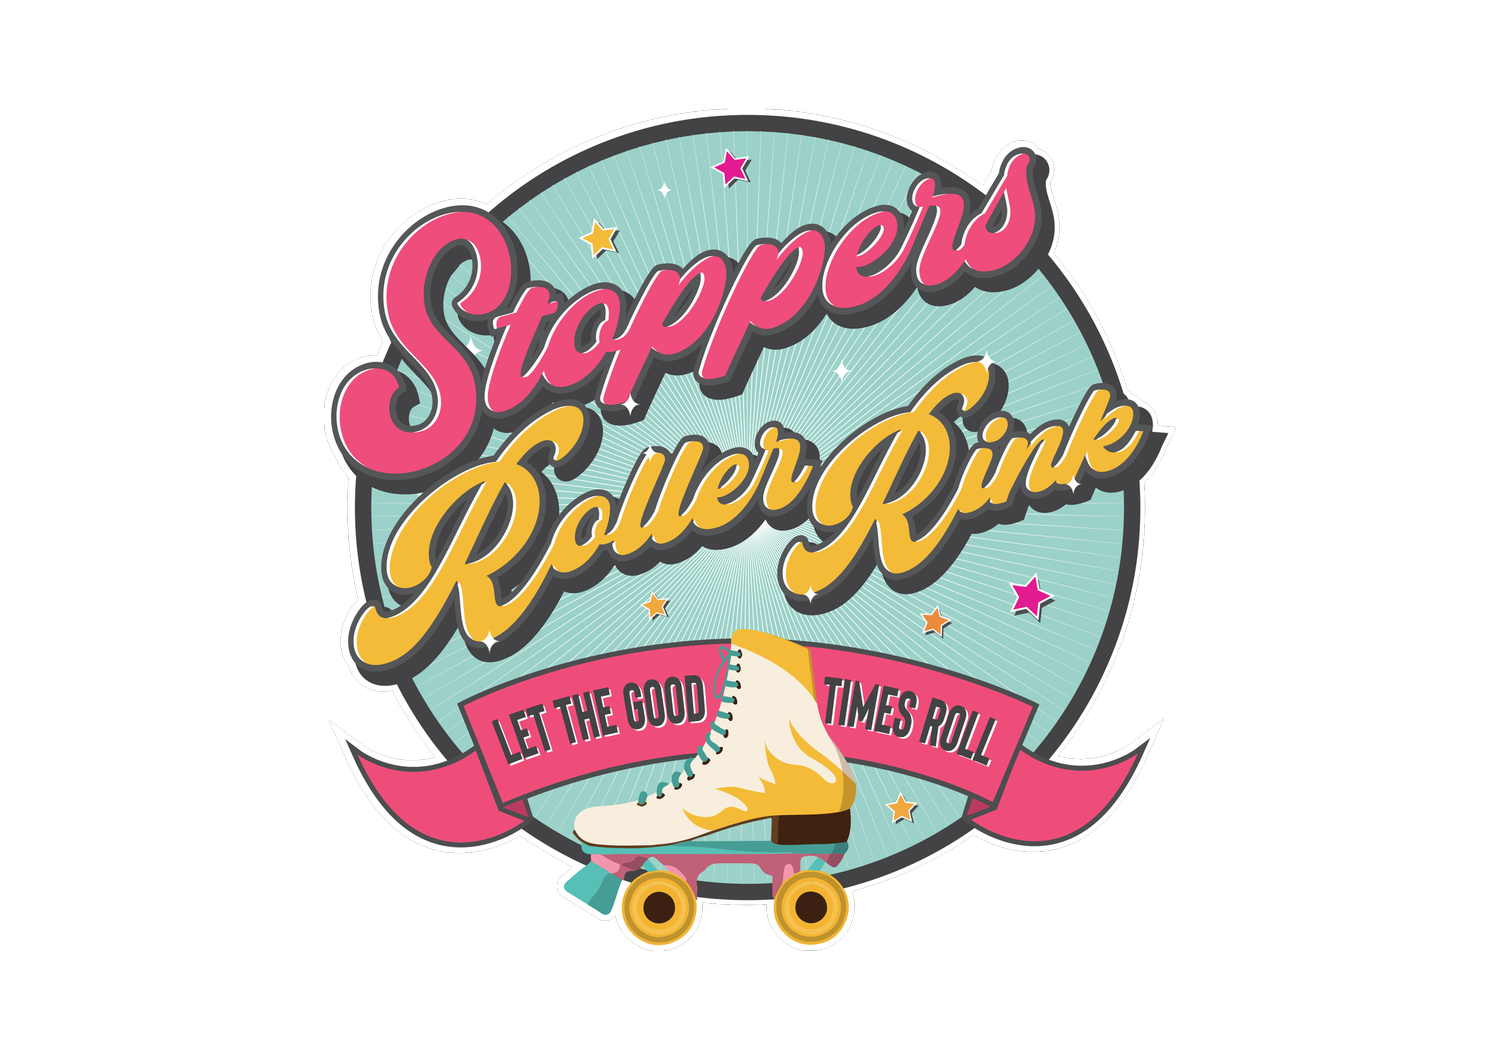 Stoppers Roller Rink